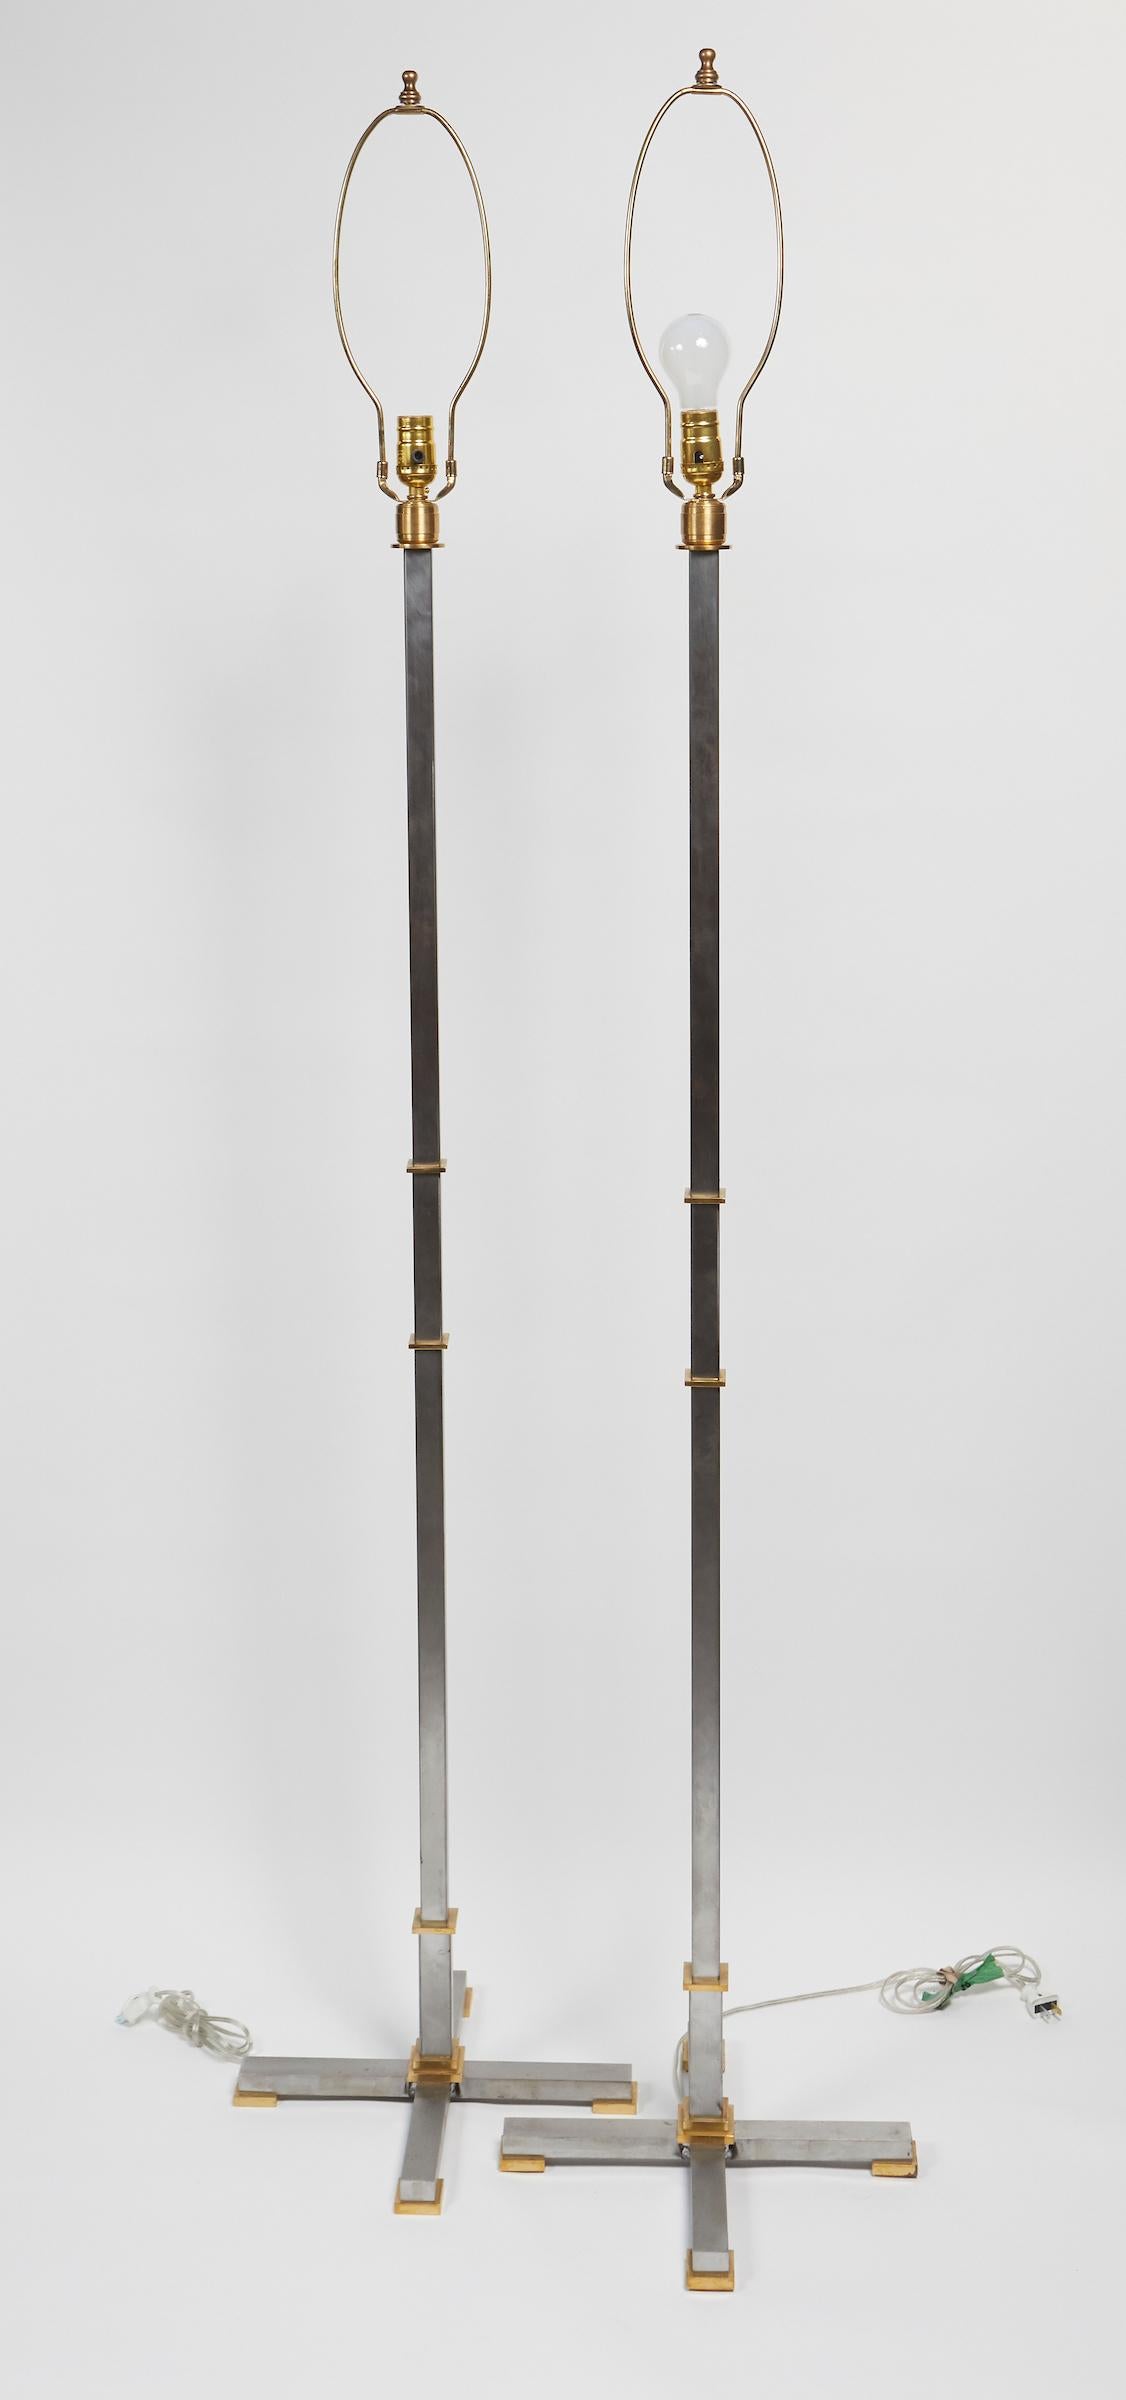 Elegant pair of brushed steal and solid brass floor lamps by Maison Jansen. Signed Jansen.